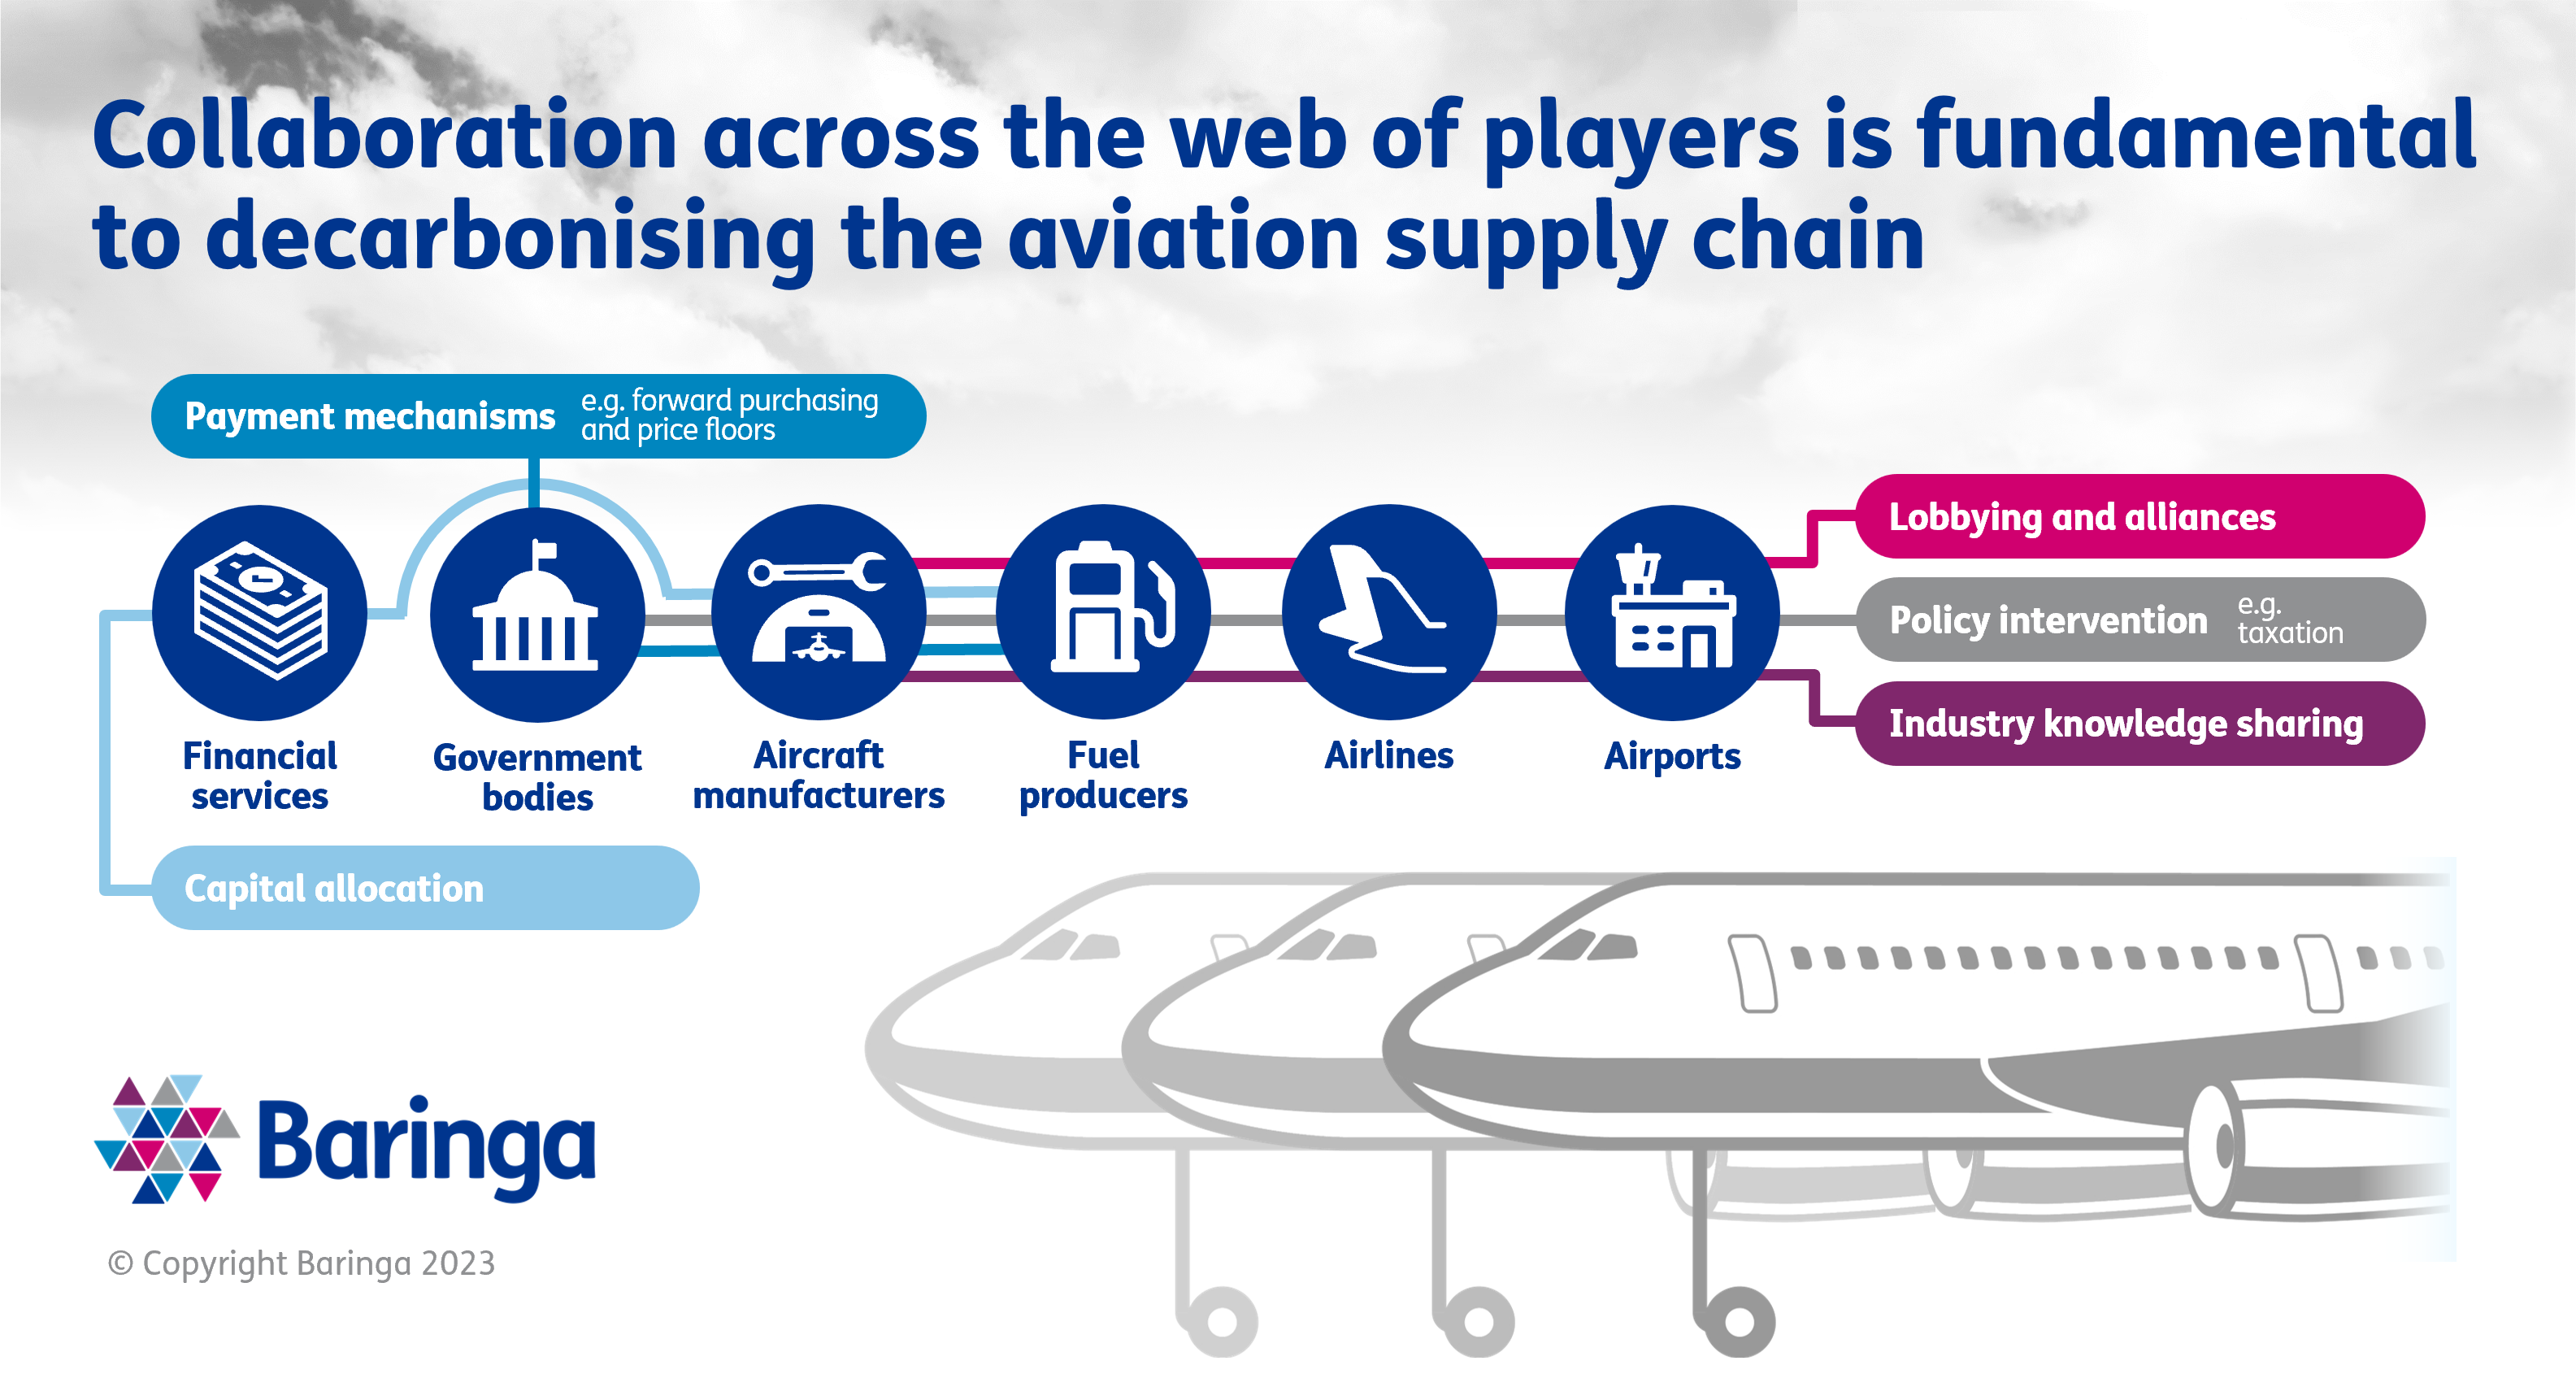 Collaboration across the web of players is fundamental to decarbonising the aviation supply chain